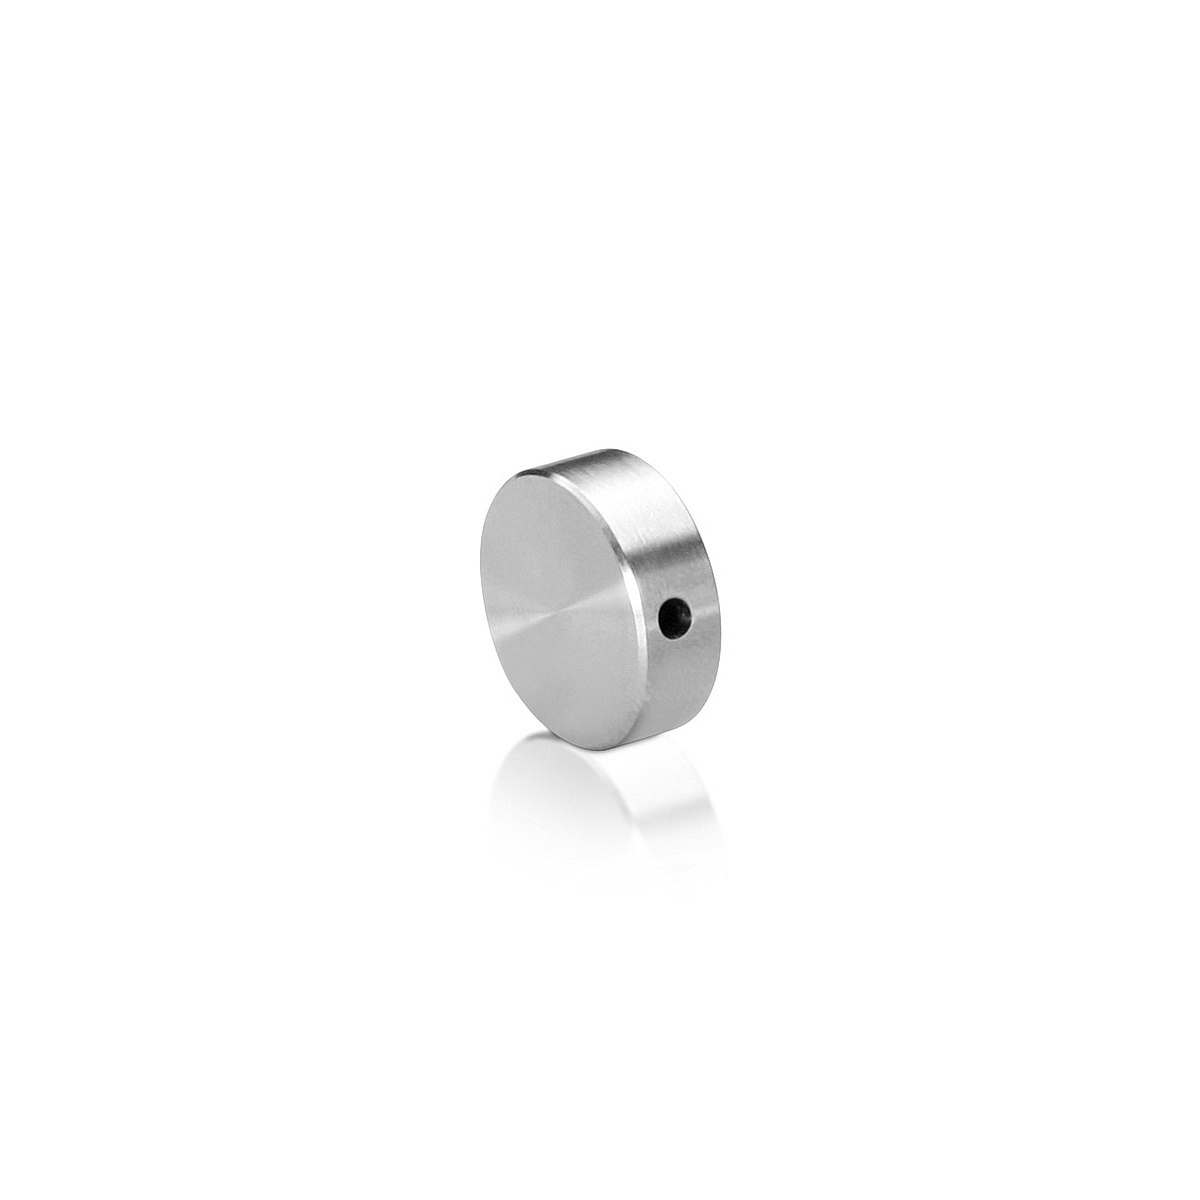 1/4-20 Threaded Locking Caps Diameter: 3/4'', Height: 1/4'', Brushed Satin Stainless Steel Grade 304 [Required Material Hole Size: 5/16'']